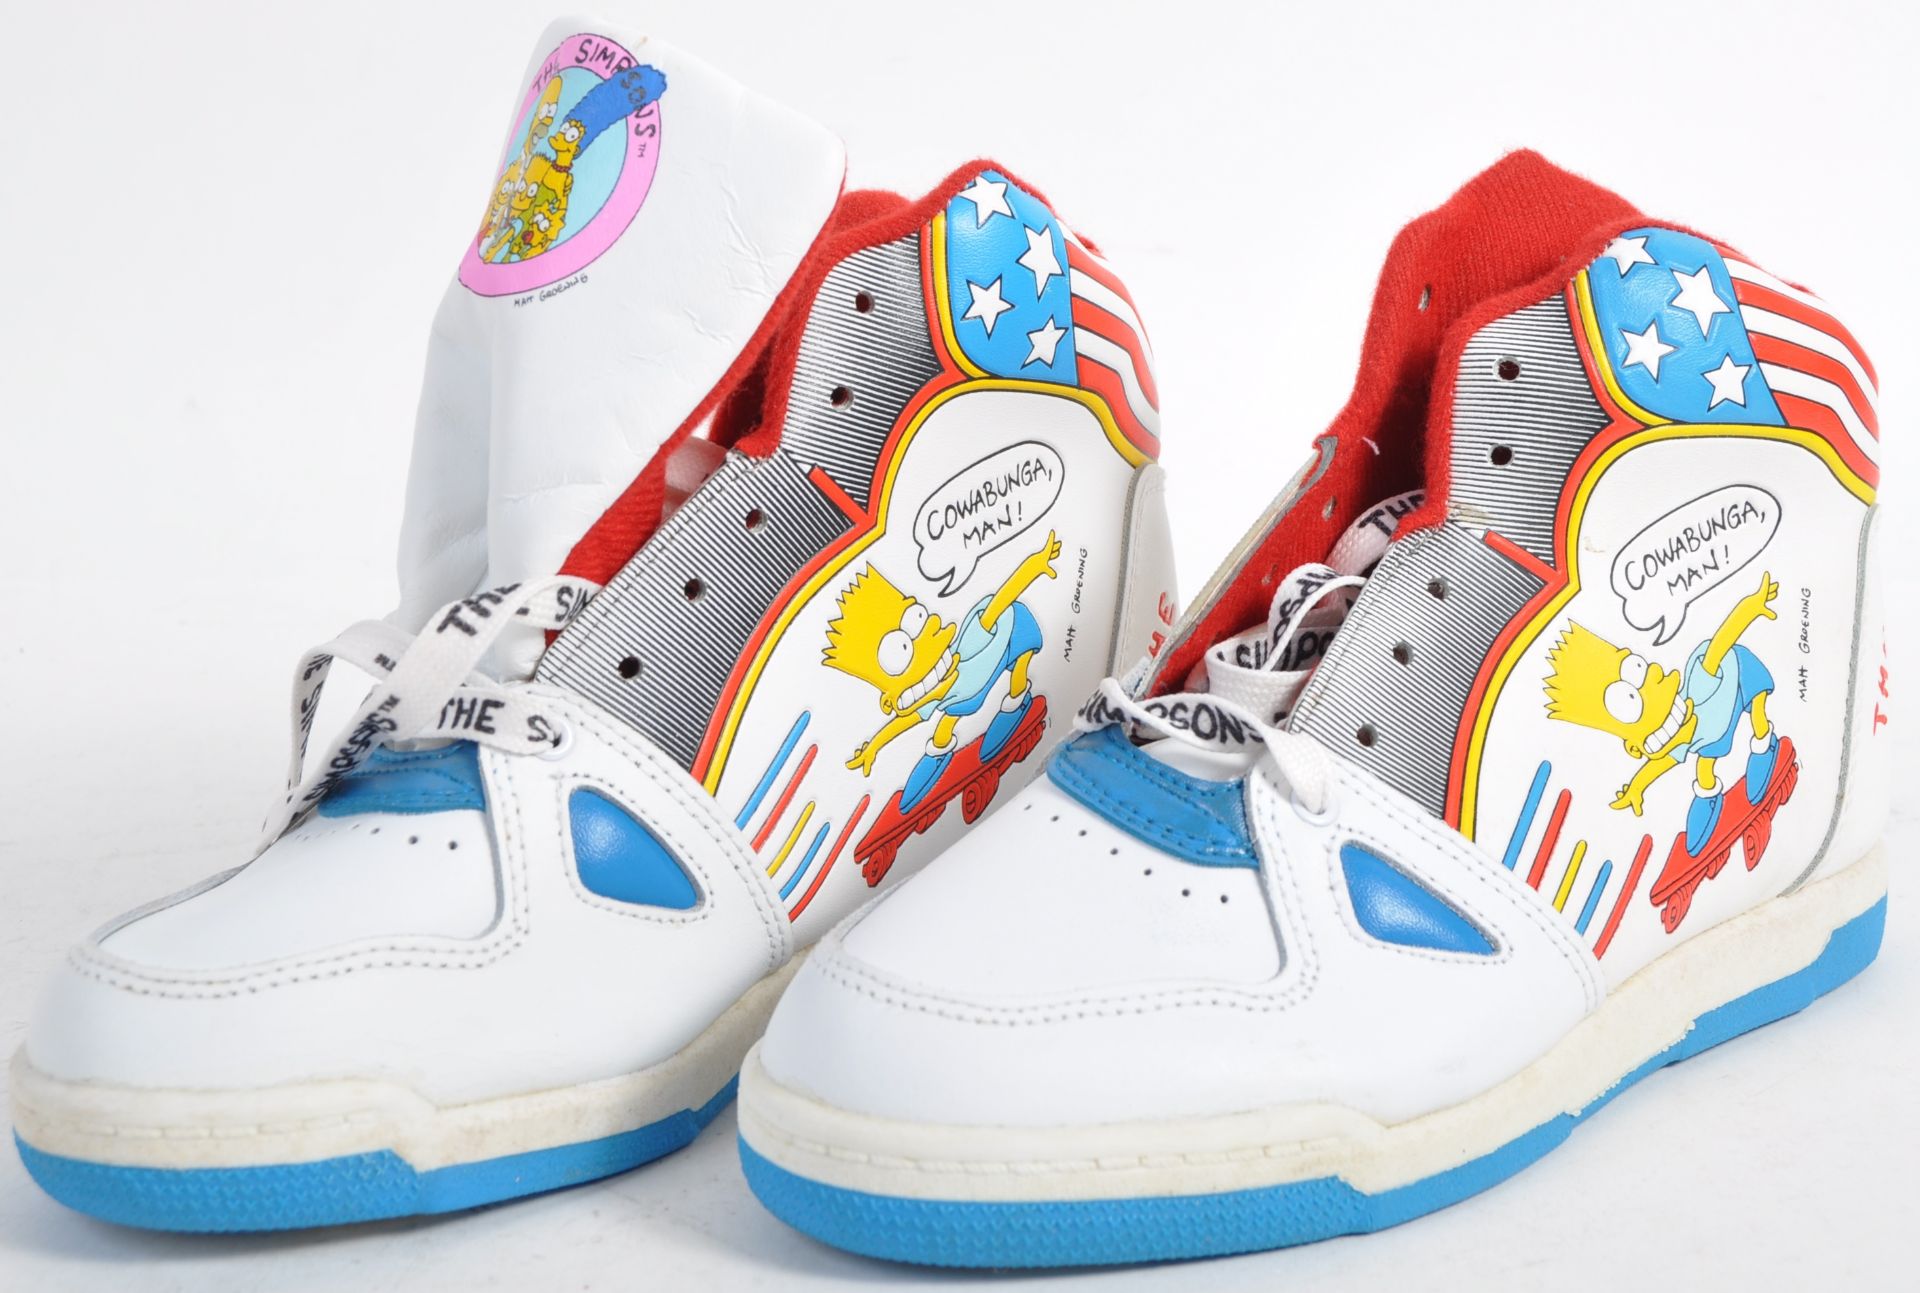 PAIR OF ORIGINAL VINTAGE BART SIMPSONS ' BART BOOT ' TRAINERS - Image 7 of 7